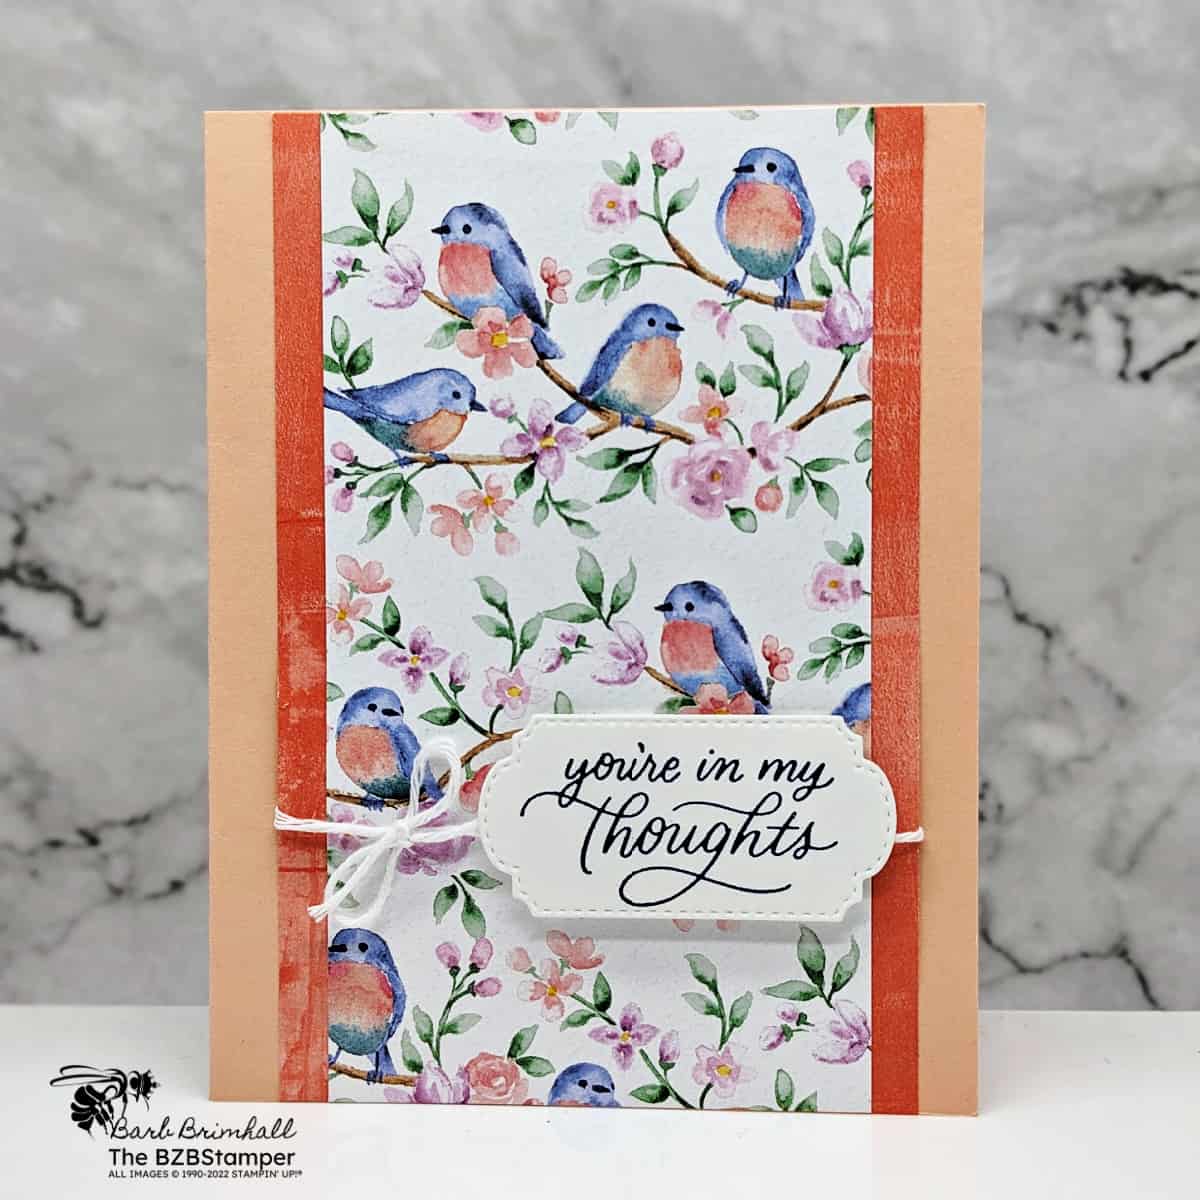 Flight and Airy Designer Paper by Stampin' Up featuring pretty birds in hues of orange and coral.